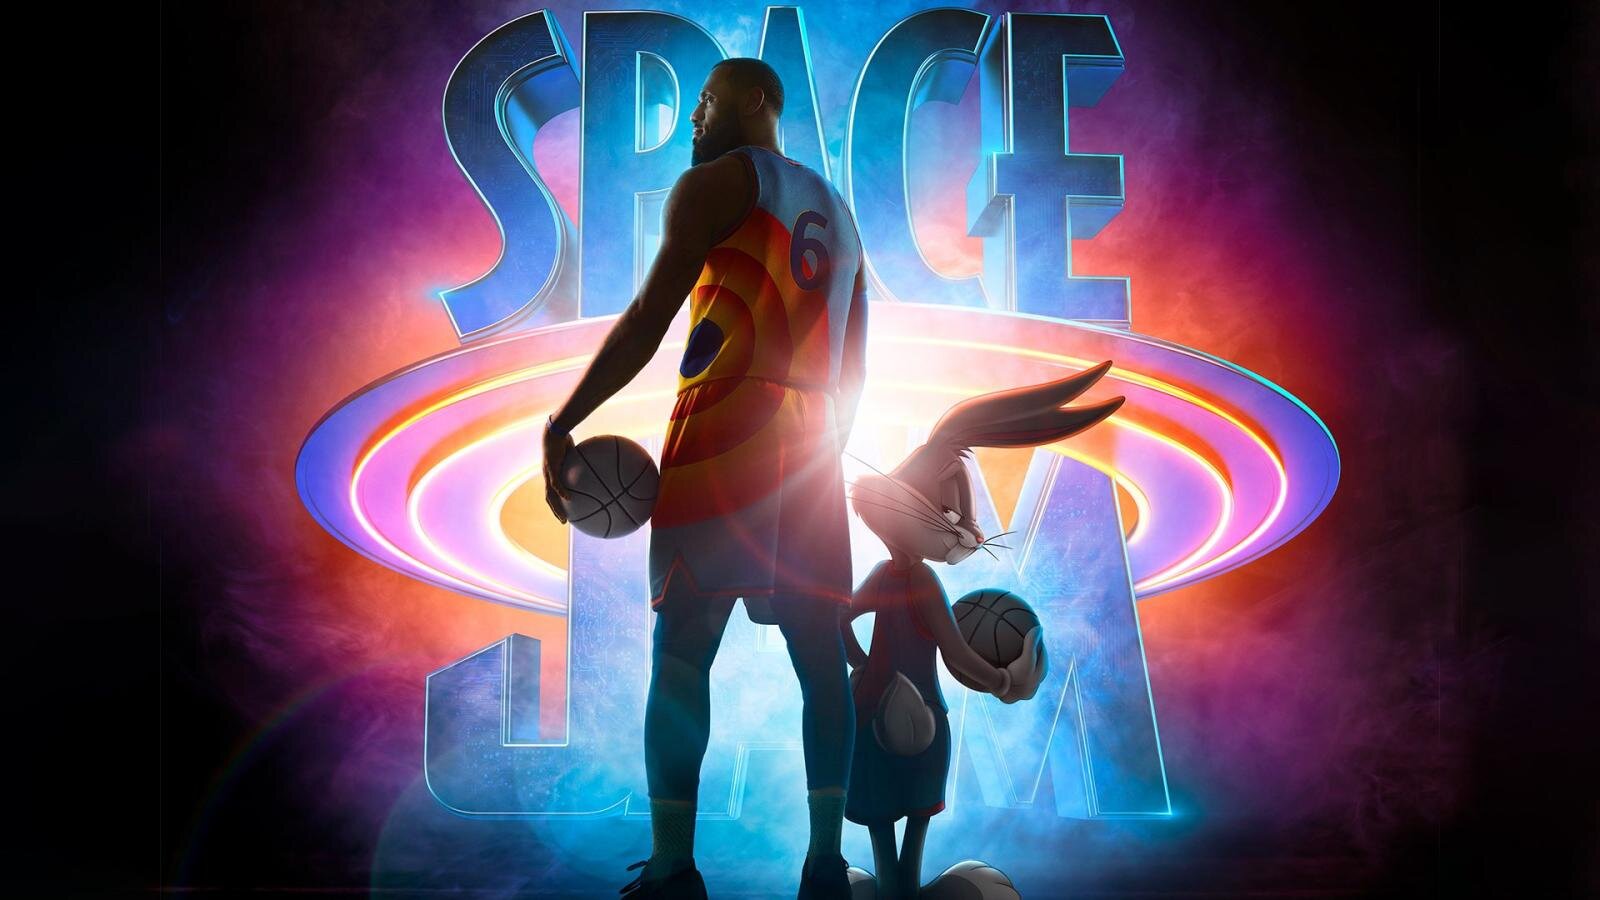 Space Jam: A New Legacy - Multiple Worlds, Multiple Deliveries. — John Daro